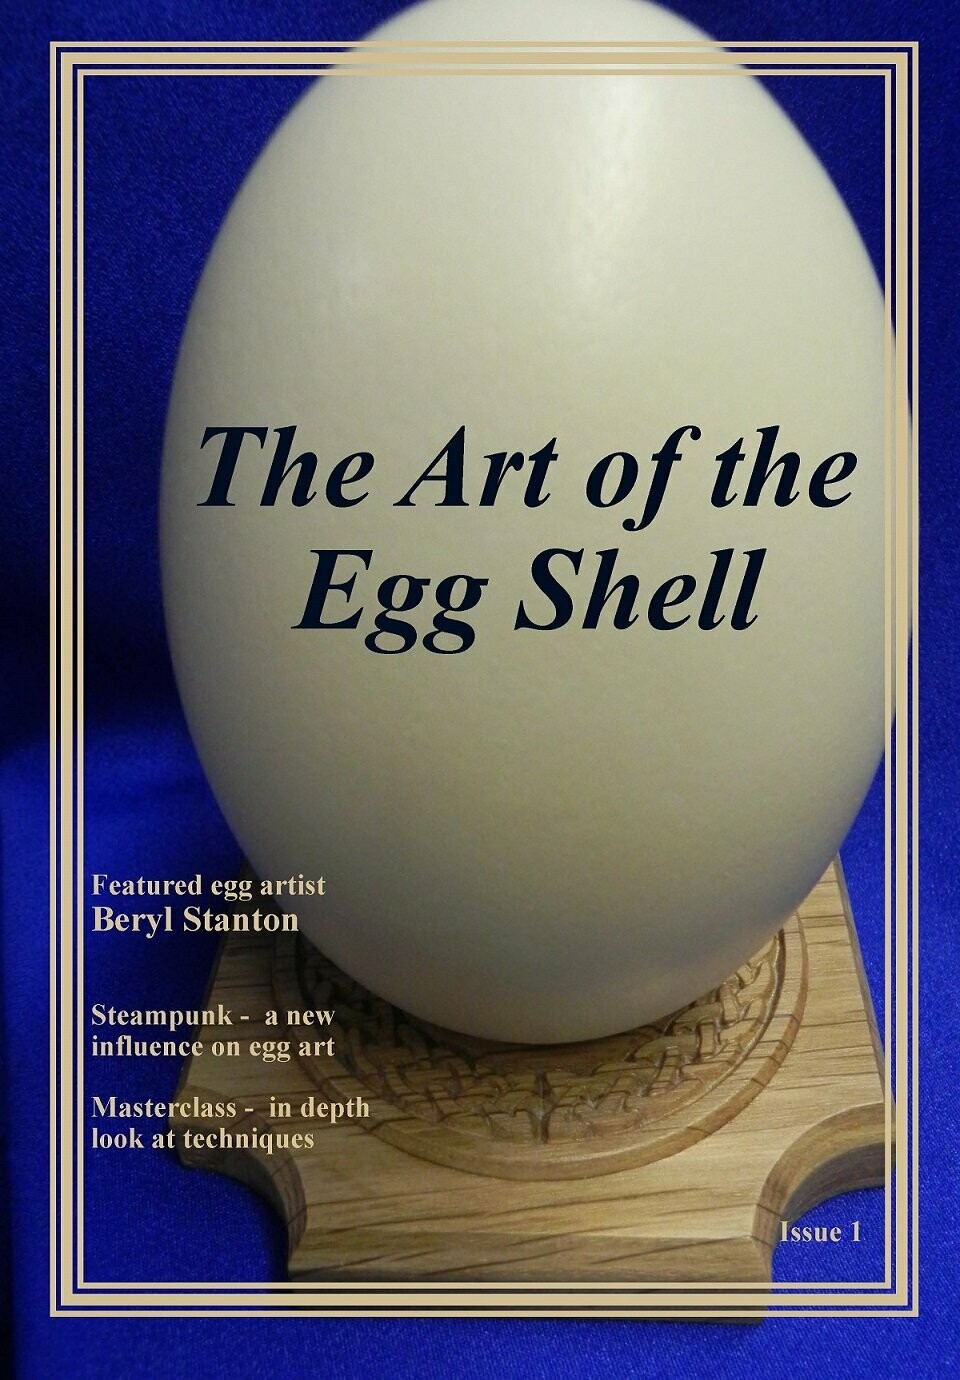 PDF Downloadable - The Art of the Egg Shell - Issue 1